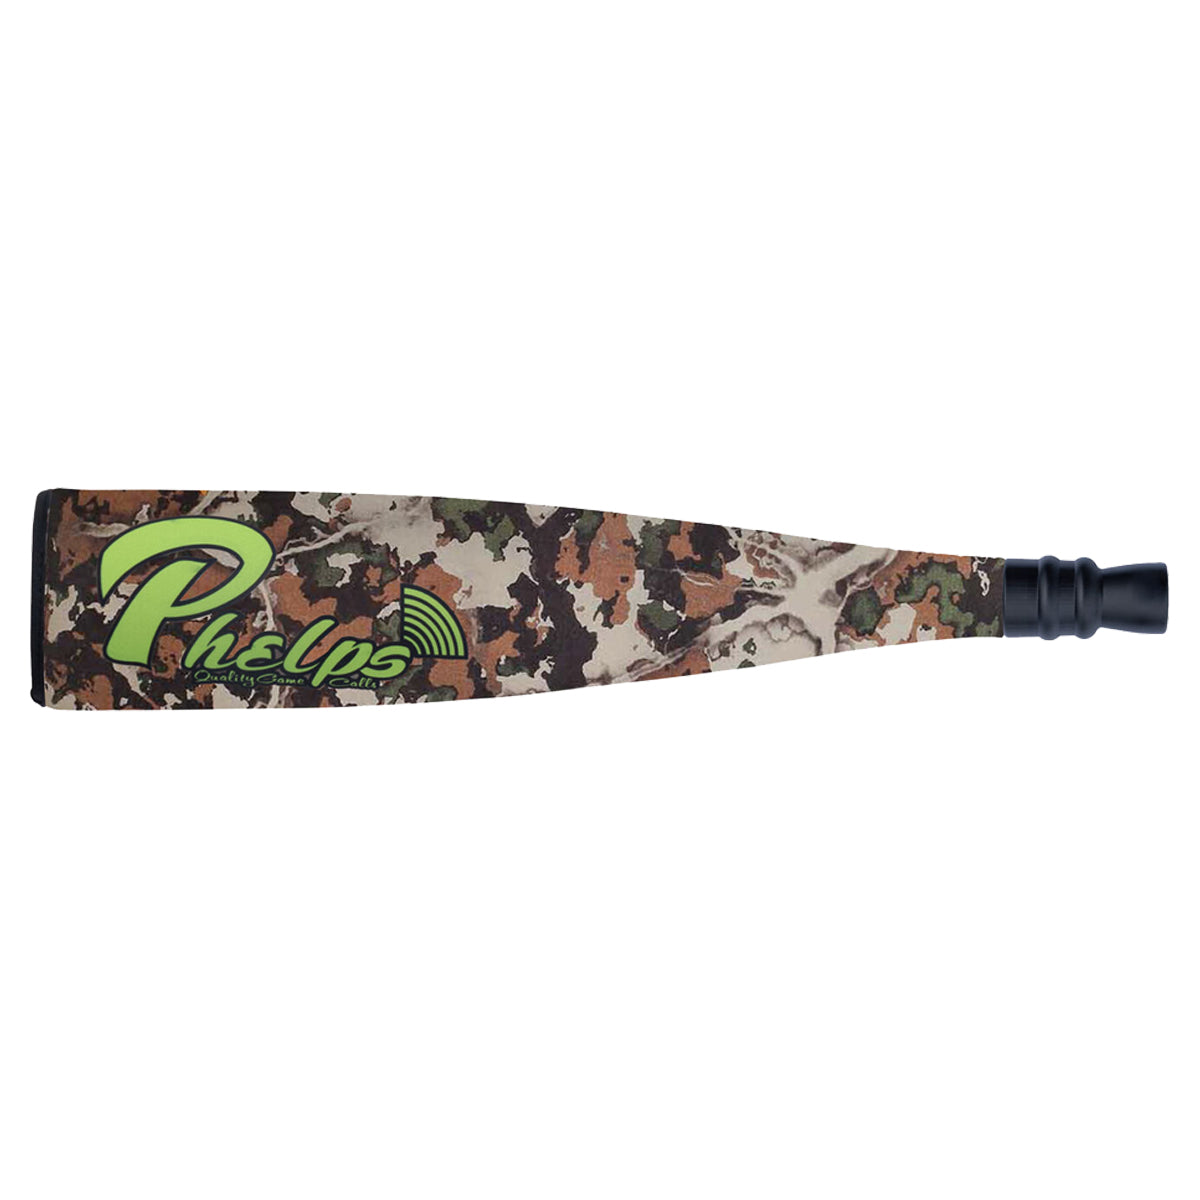 Phelps Metal Bugle Tube in Fusion by GOHUNT | Phelps Game Calls - GOHUNT Shop